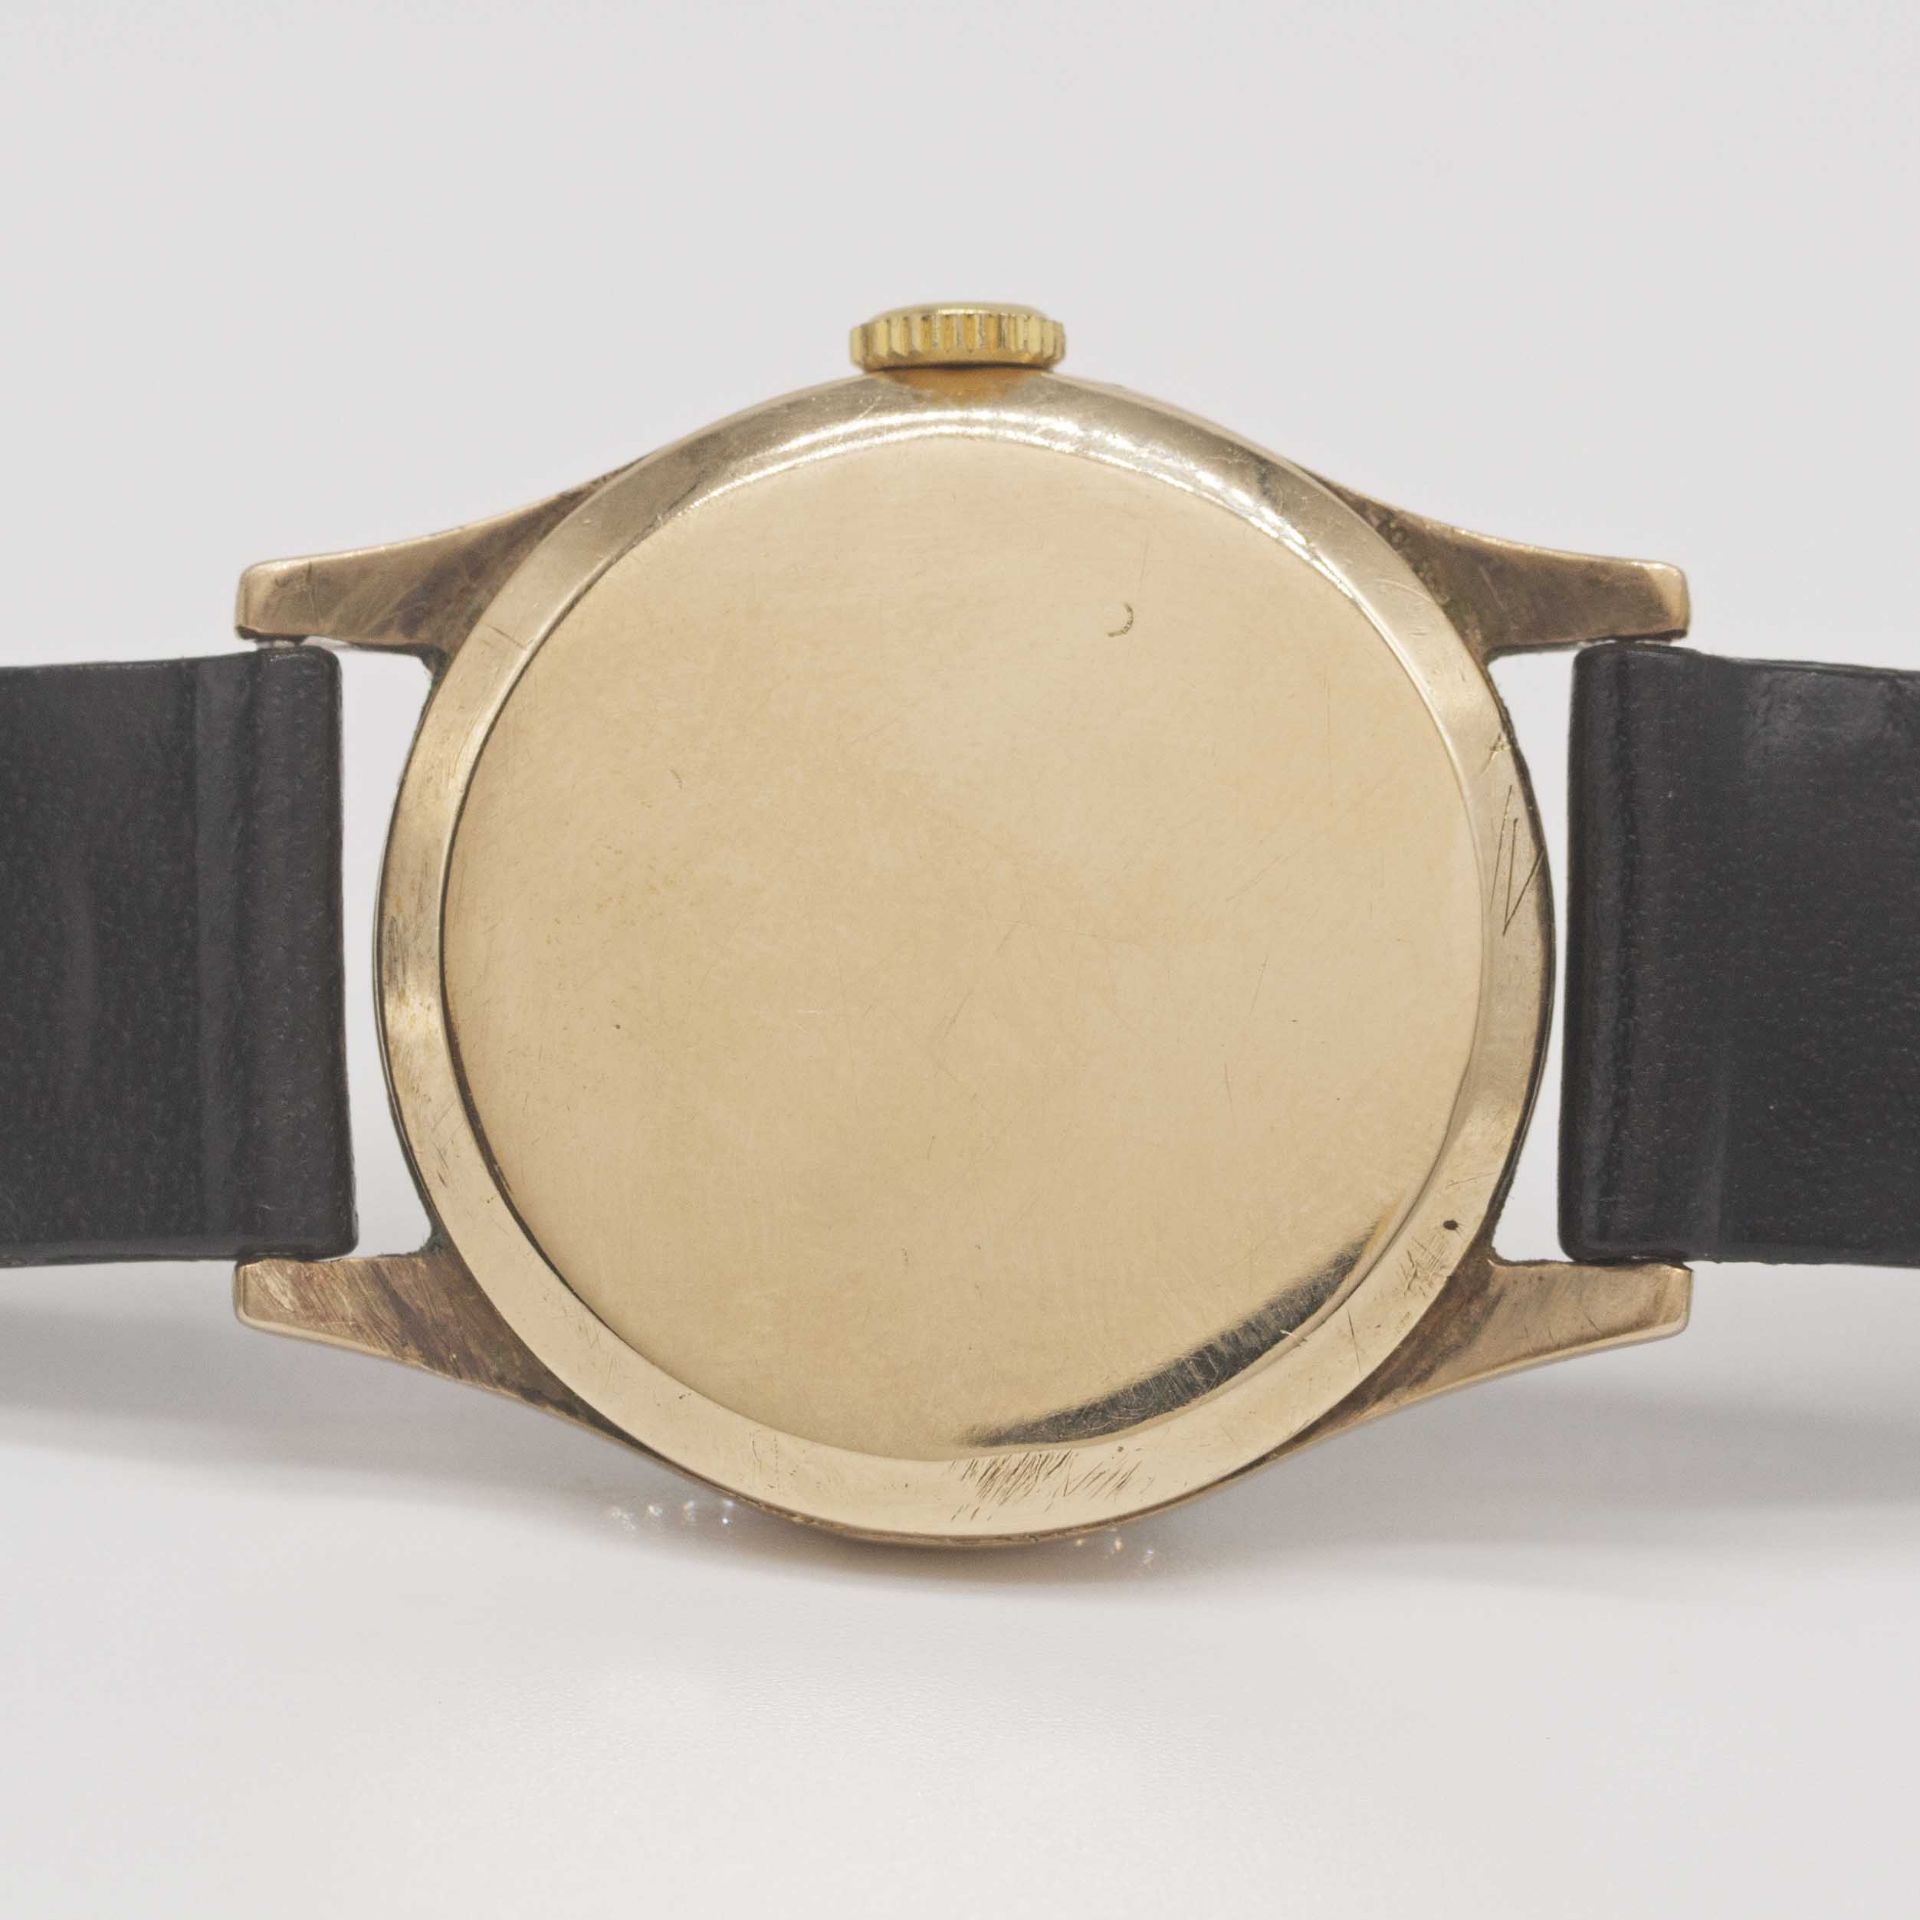 A GENTLEMAN'S 9CT SOLID GOLD ROLEX PRECISION WRIST WATCH CIRCA 1958 Movement: 17J, manual wind, cal. - Image 6 of 10